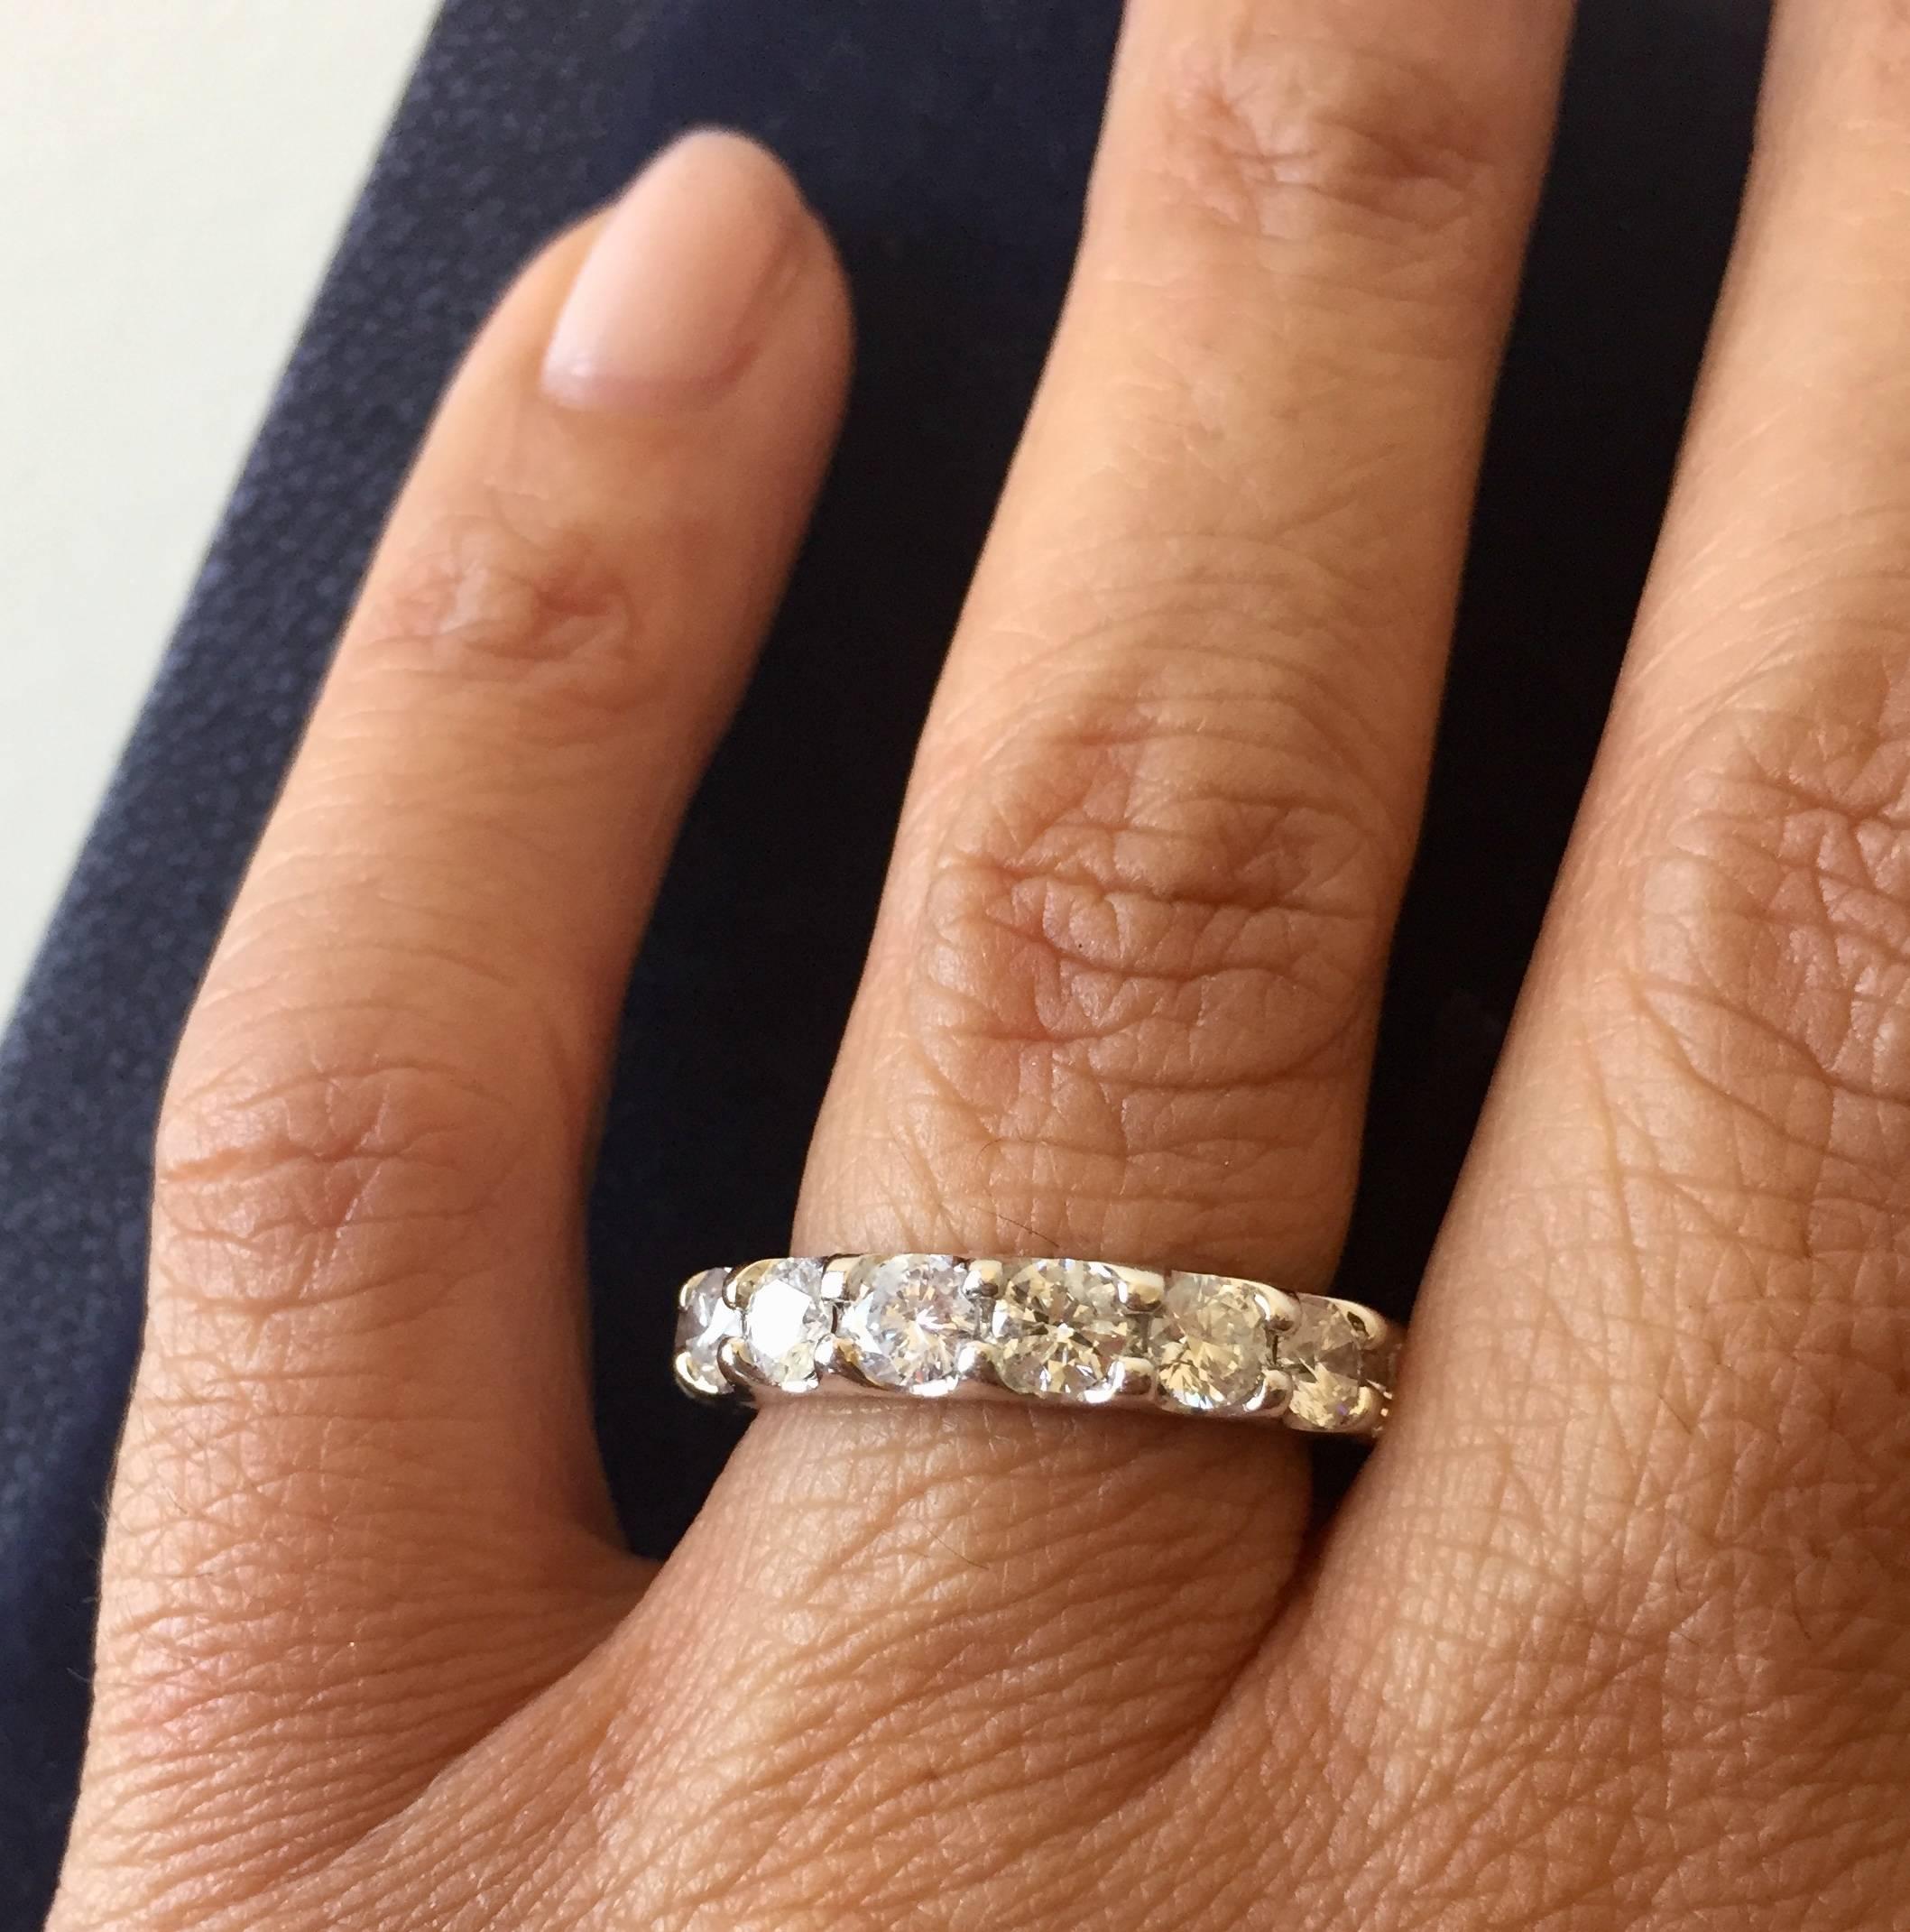 This low setting, shared prong eternity band, is one of the most desirable rings on the market today. The U- Prong of the ring sets the stones low which makes the ring very comfortable, and gives the illusion of a bigger stone. The color and clarity